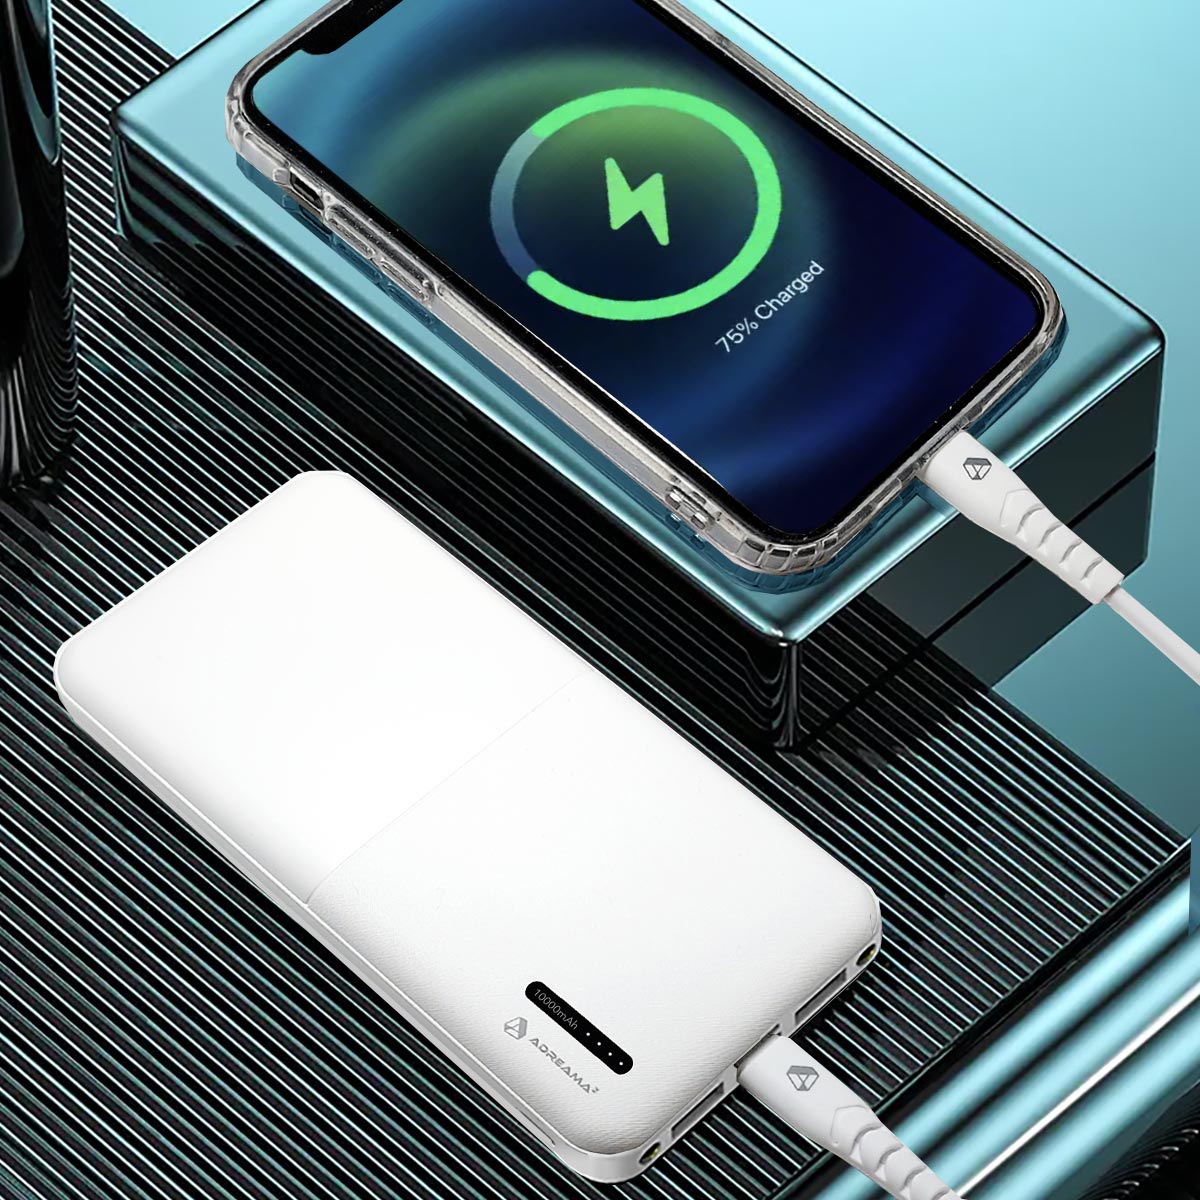 The Ultimate Power Companion: Adreama 10000mAh Fast Charge Power Bank 18W, White